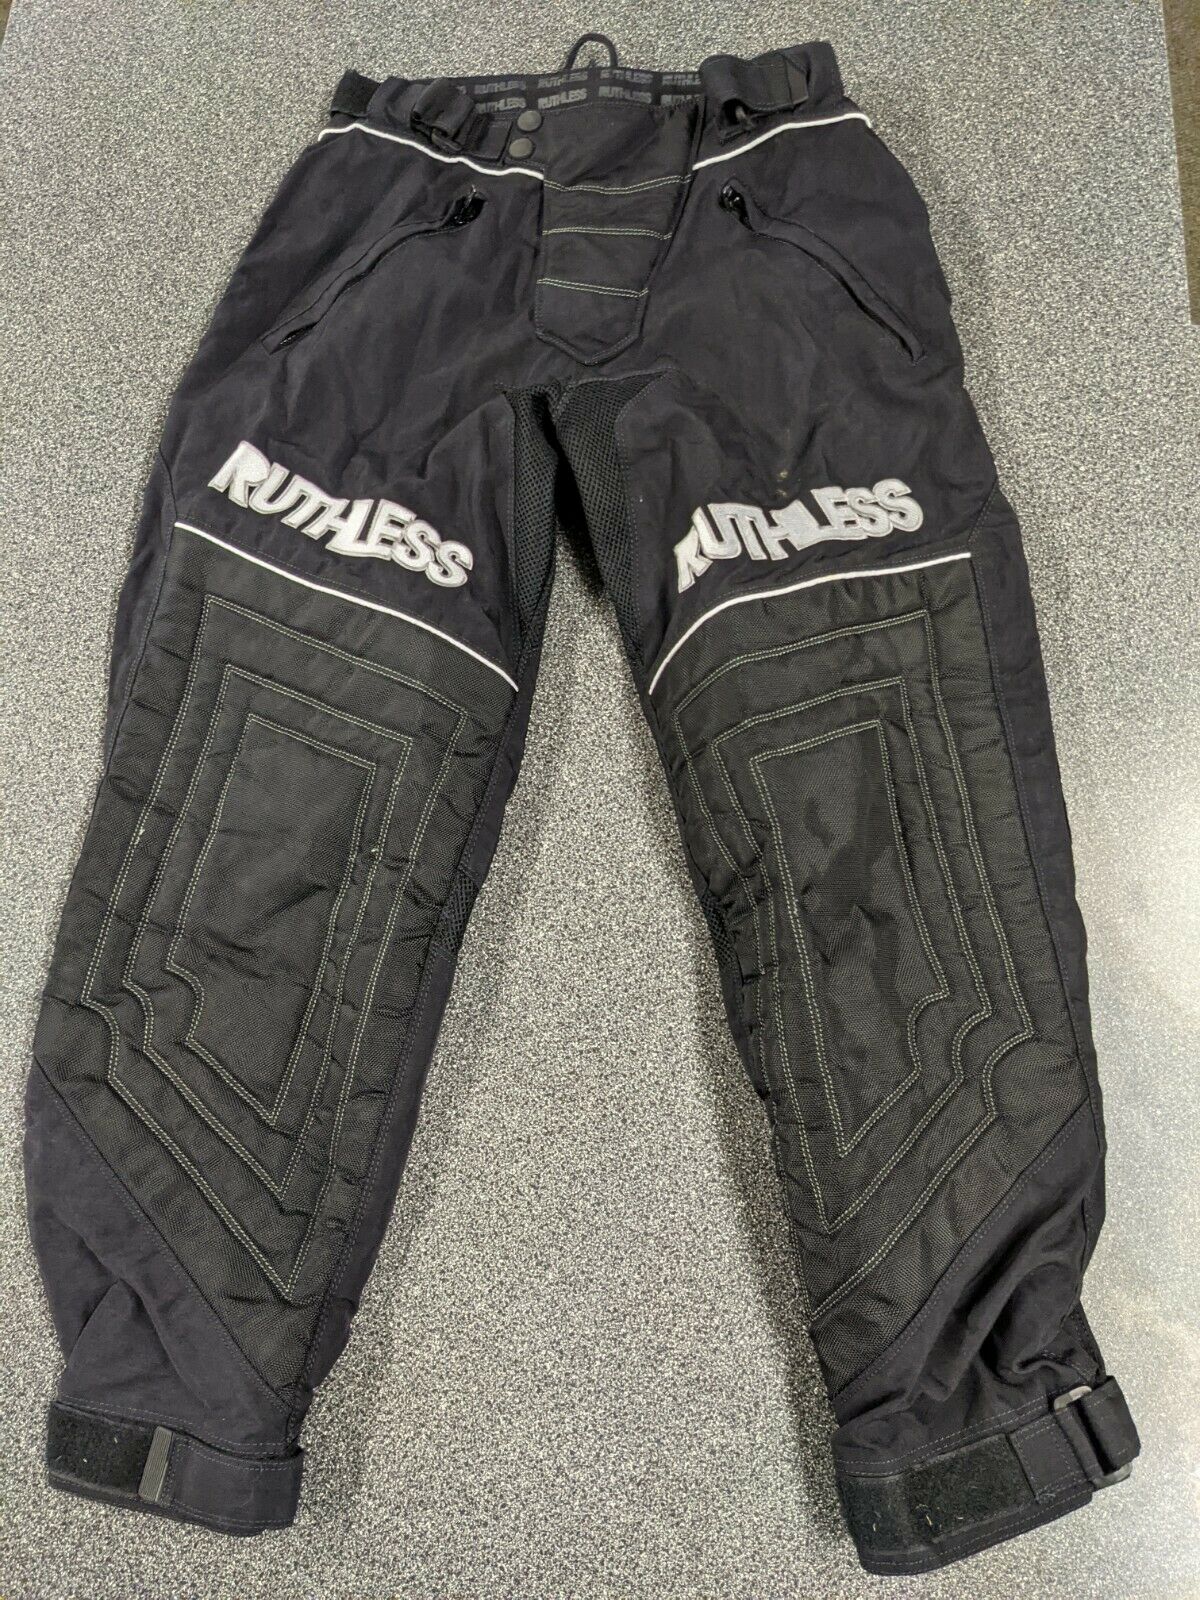 Ruthless Paintball Pants.  Size Small. Rare!